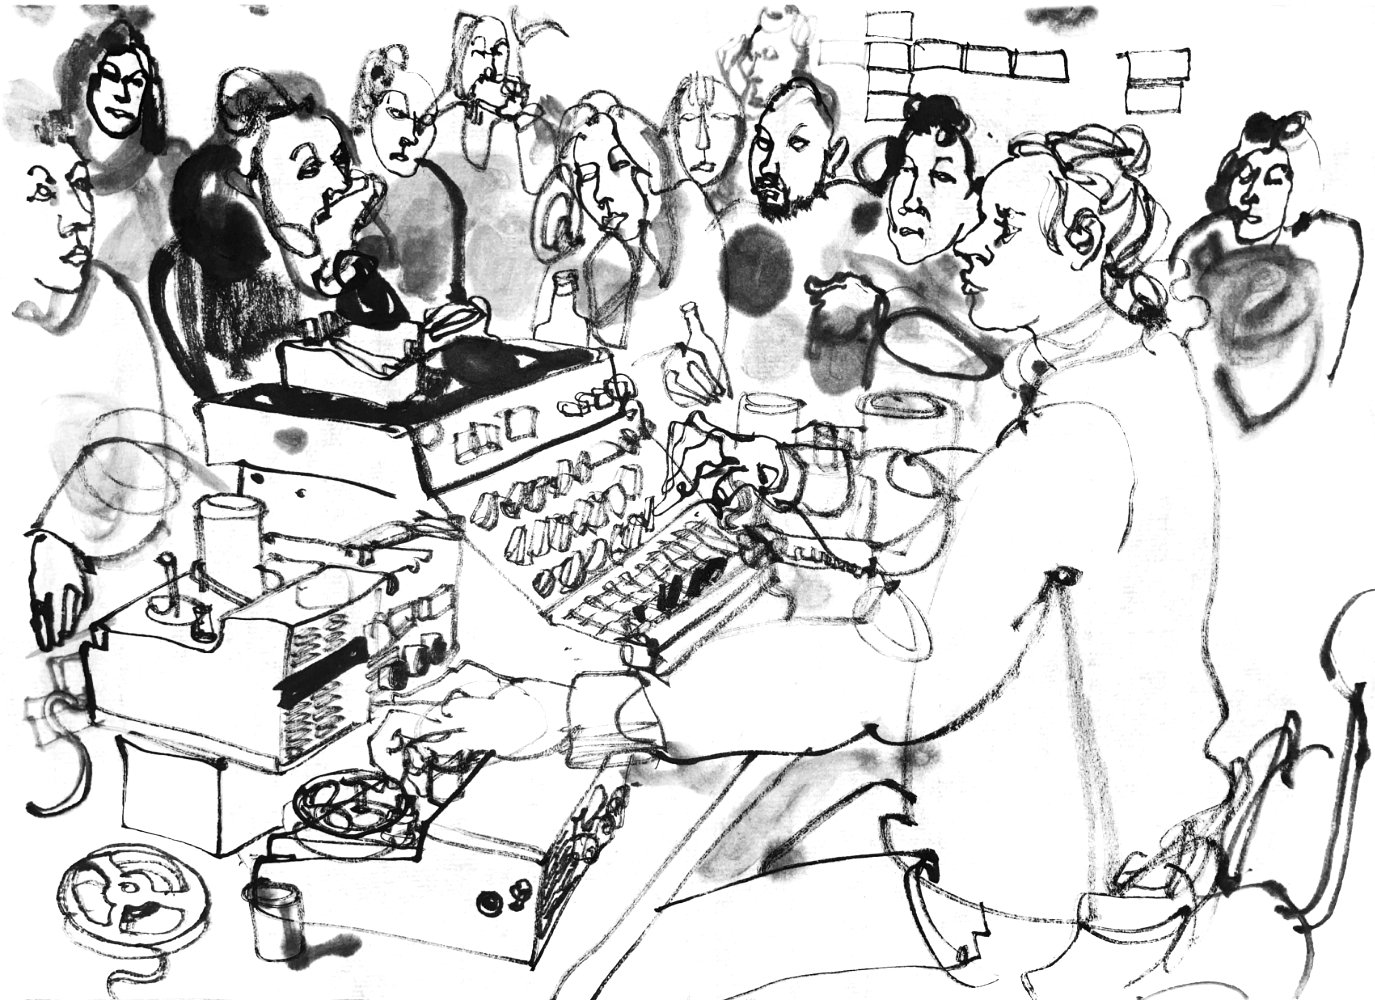 Ink drawing of a female musician at a desk. On the desk are various tape machines, an analogue mixing console. There are tape rolls on the desk,. The nusician manupulates the rotation of a role on a tape machine with a finger of the left hand and a slider on the console with the right hand. Behind and to the left of the desk are people as audience. 